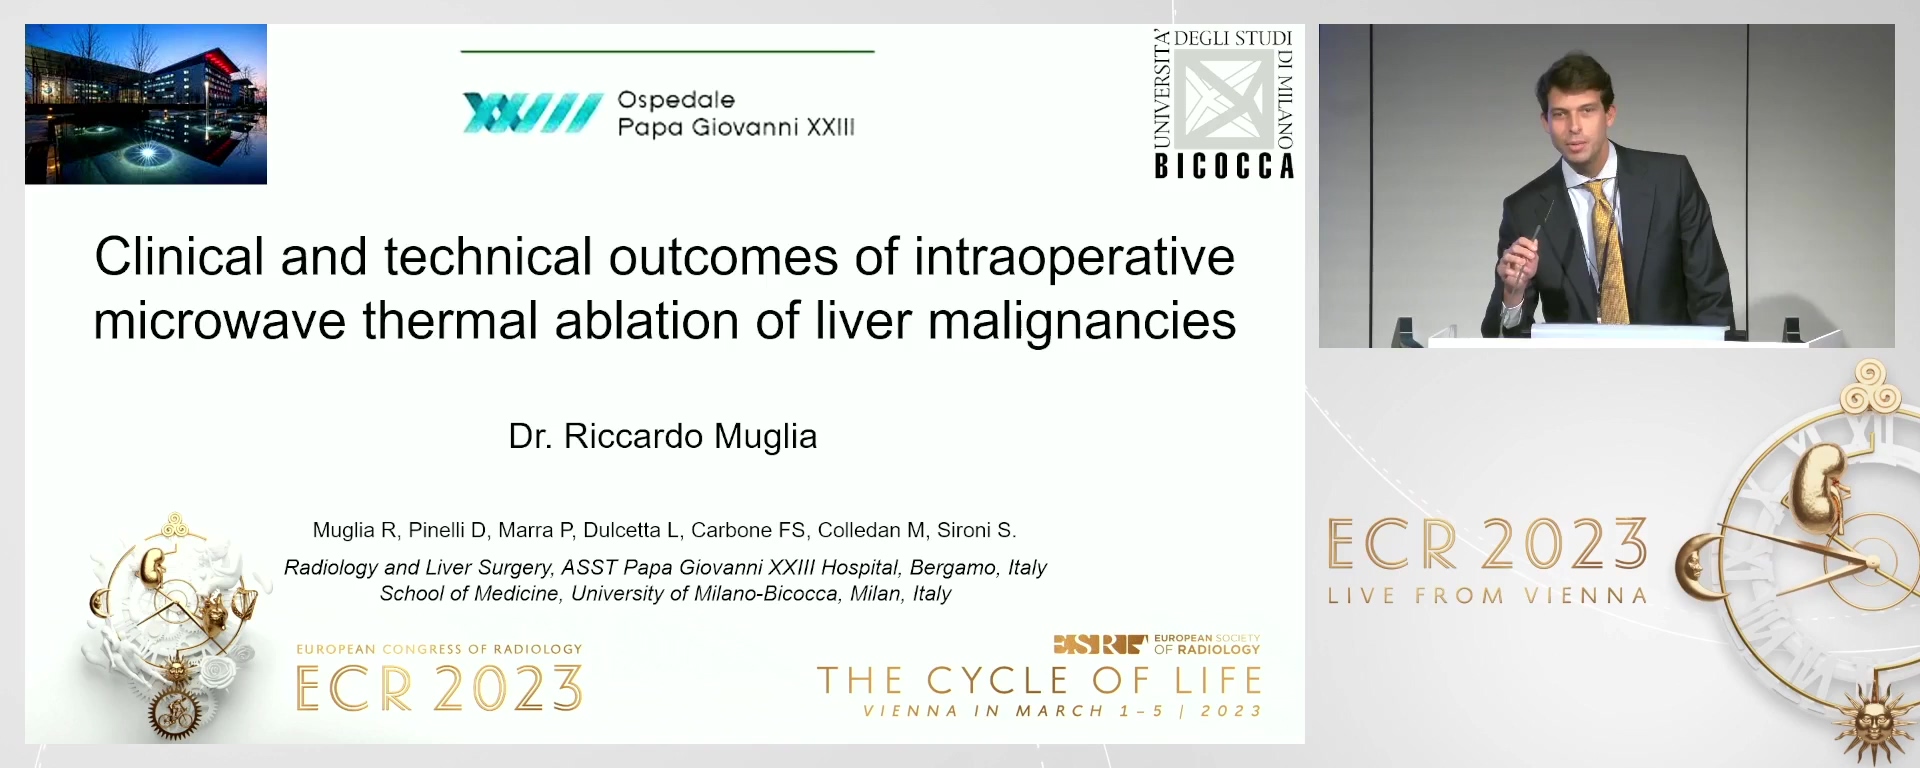 Clinical and technical outcomes of intraoperative microwave thermal ablation of liver malignancies